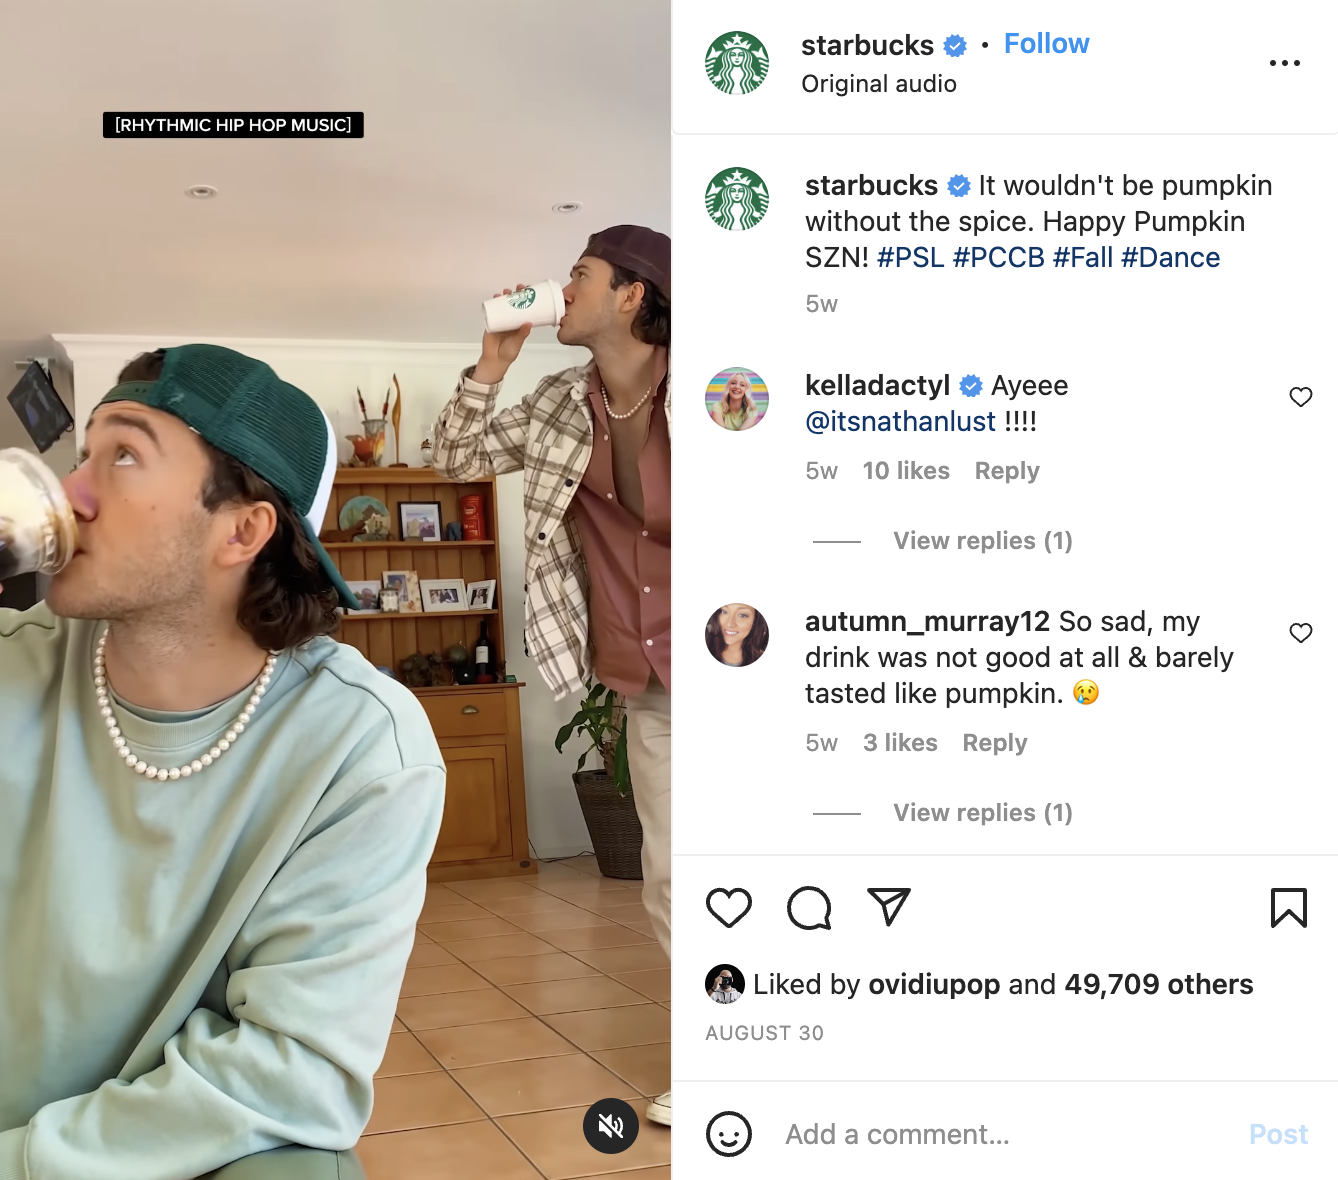 A screenshot of a starbucks' instagram post with a guy making a video while drinking starbucks